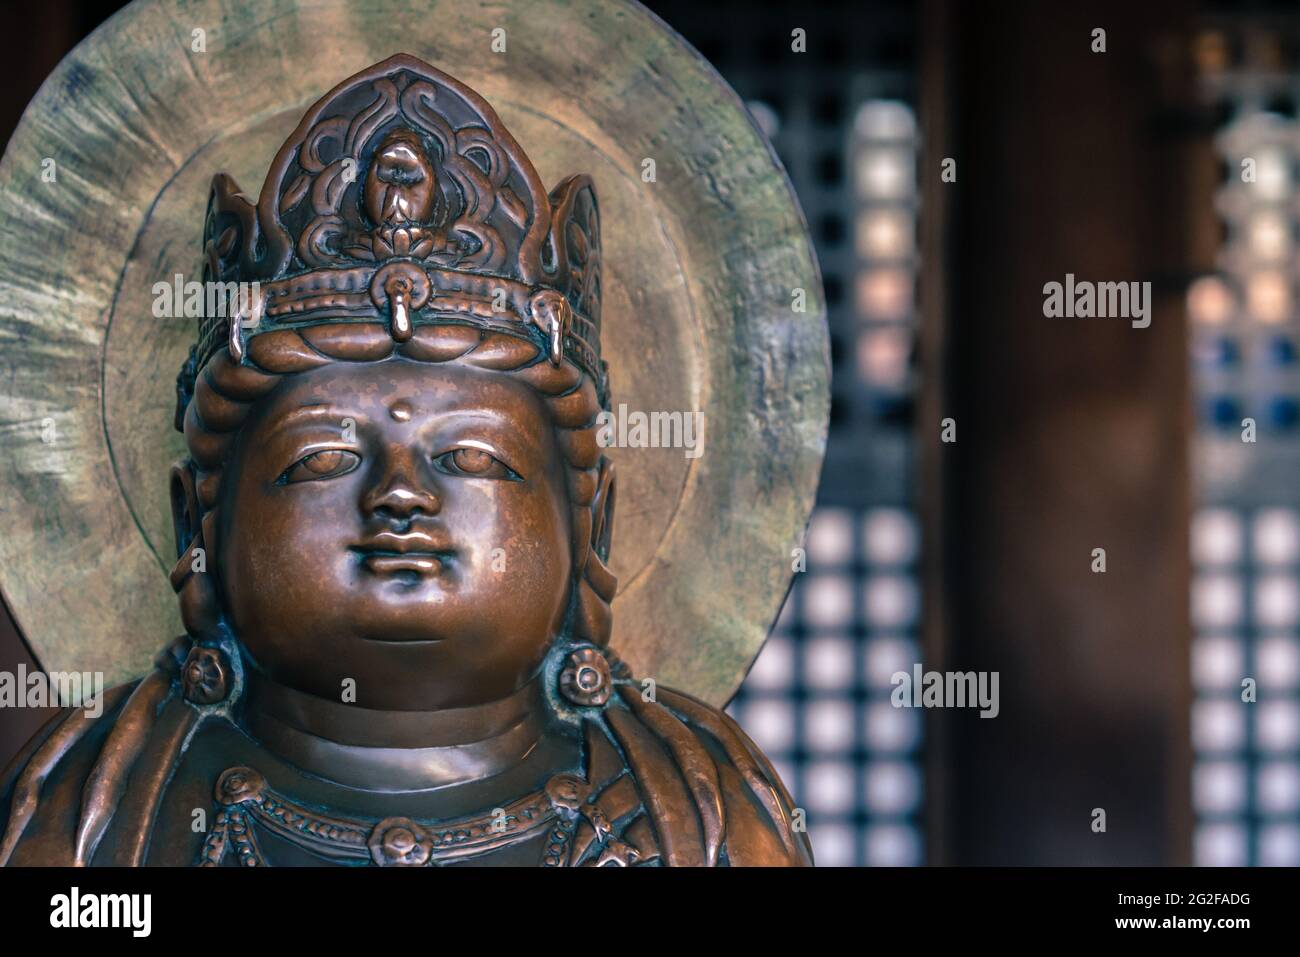 Small bronze Buddha statue with crown on his head in an old Buddhist temple of Kiyomizu Dera in Kyoto, Japan. Arts and symbols of Buddhism in the far Stock Photo